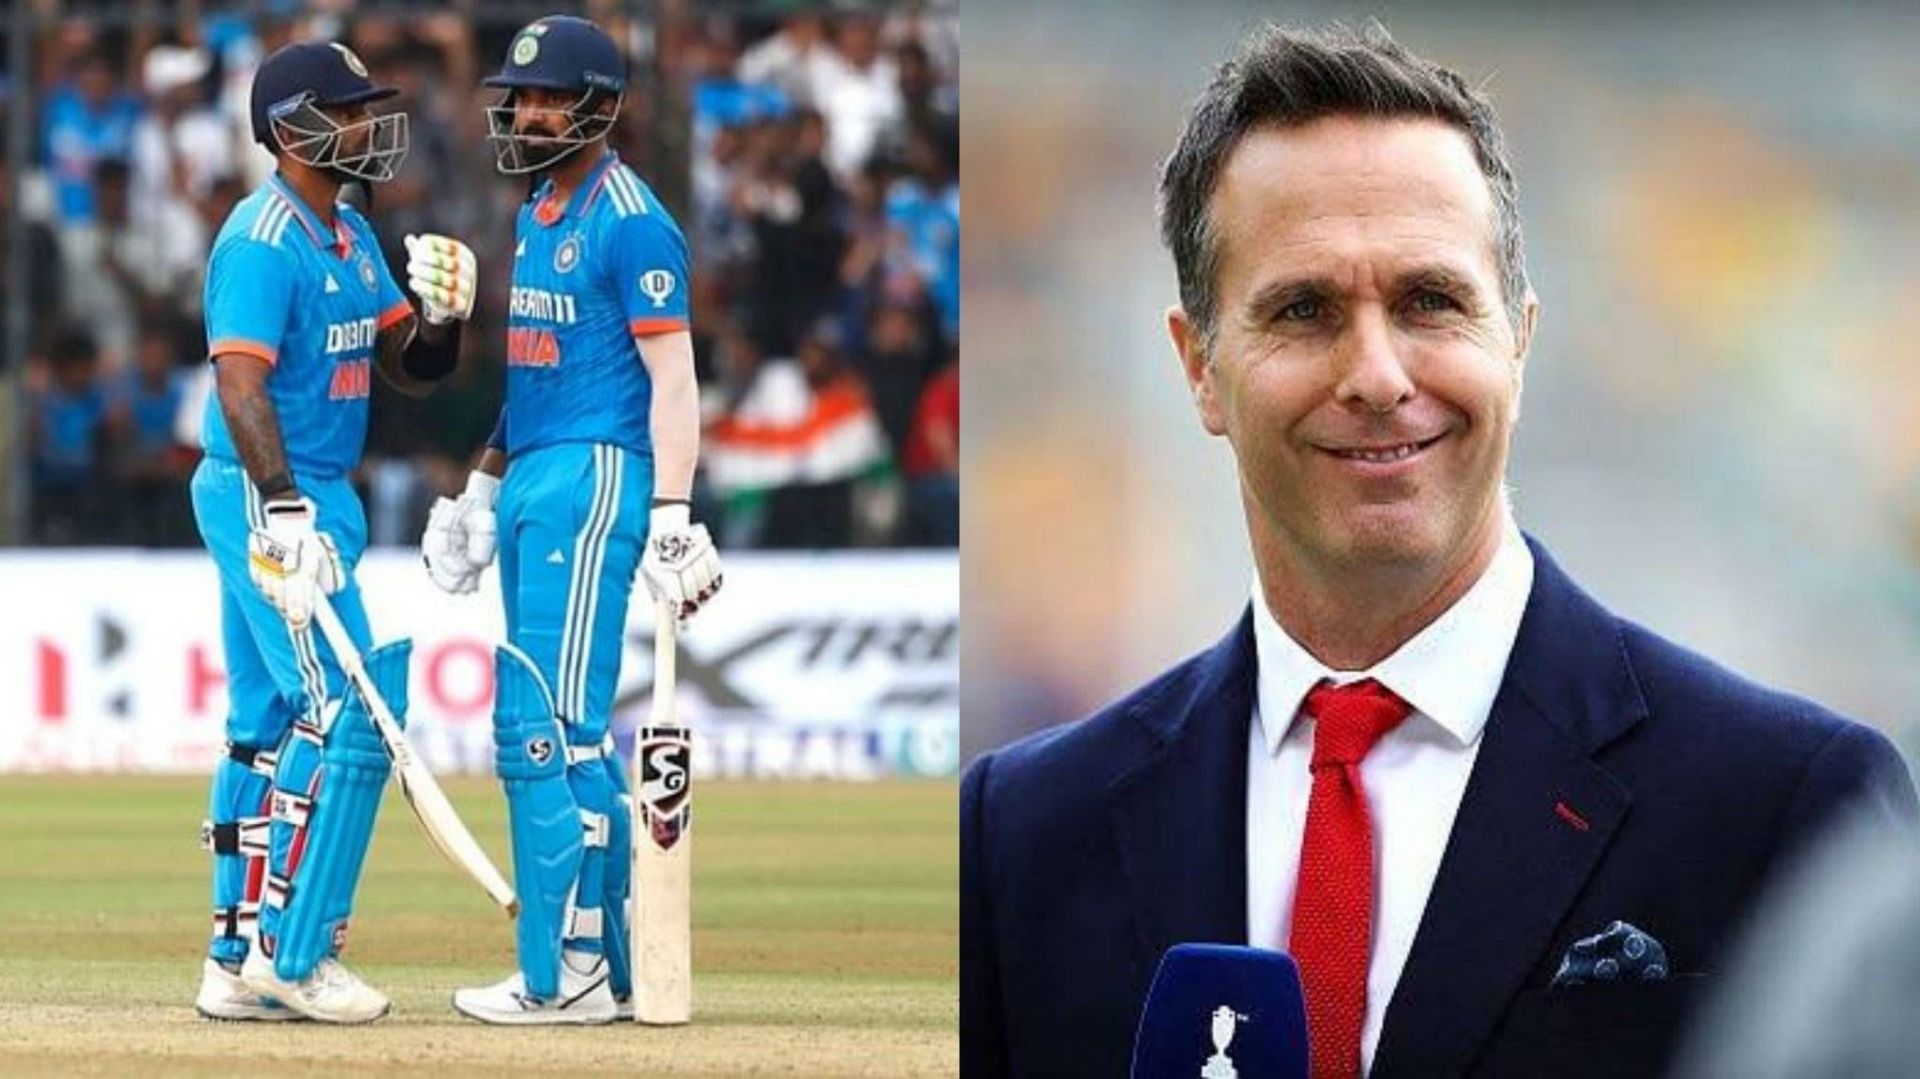 Michael Vaughan recently made a bold prediction for Team India